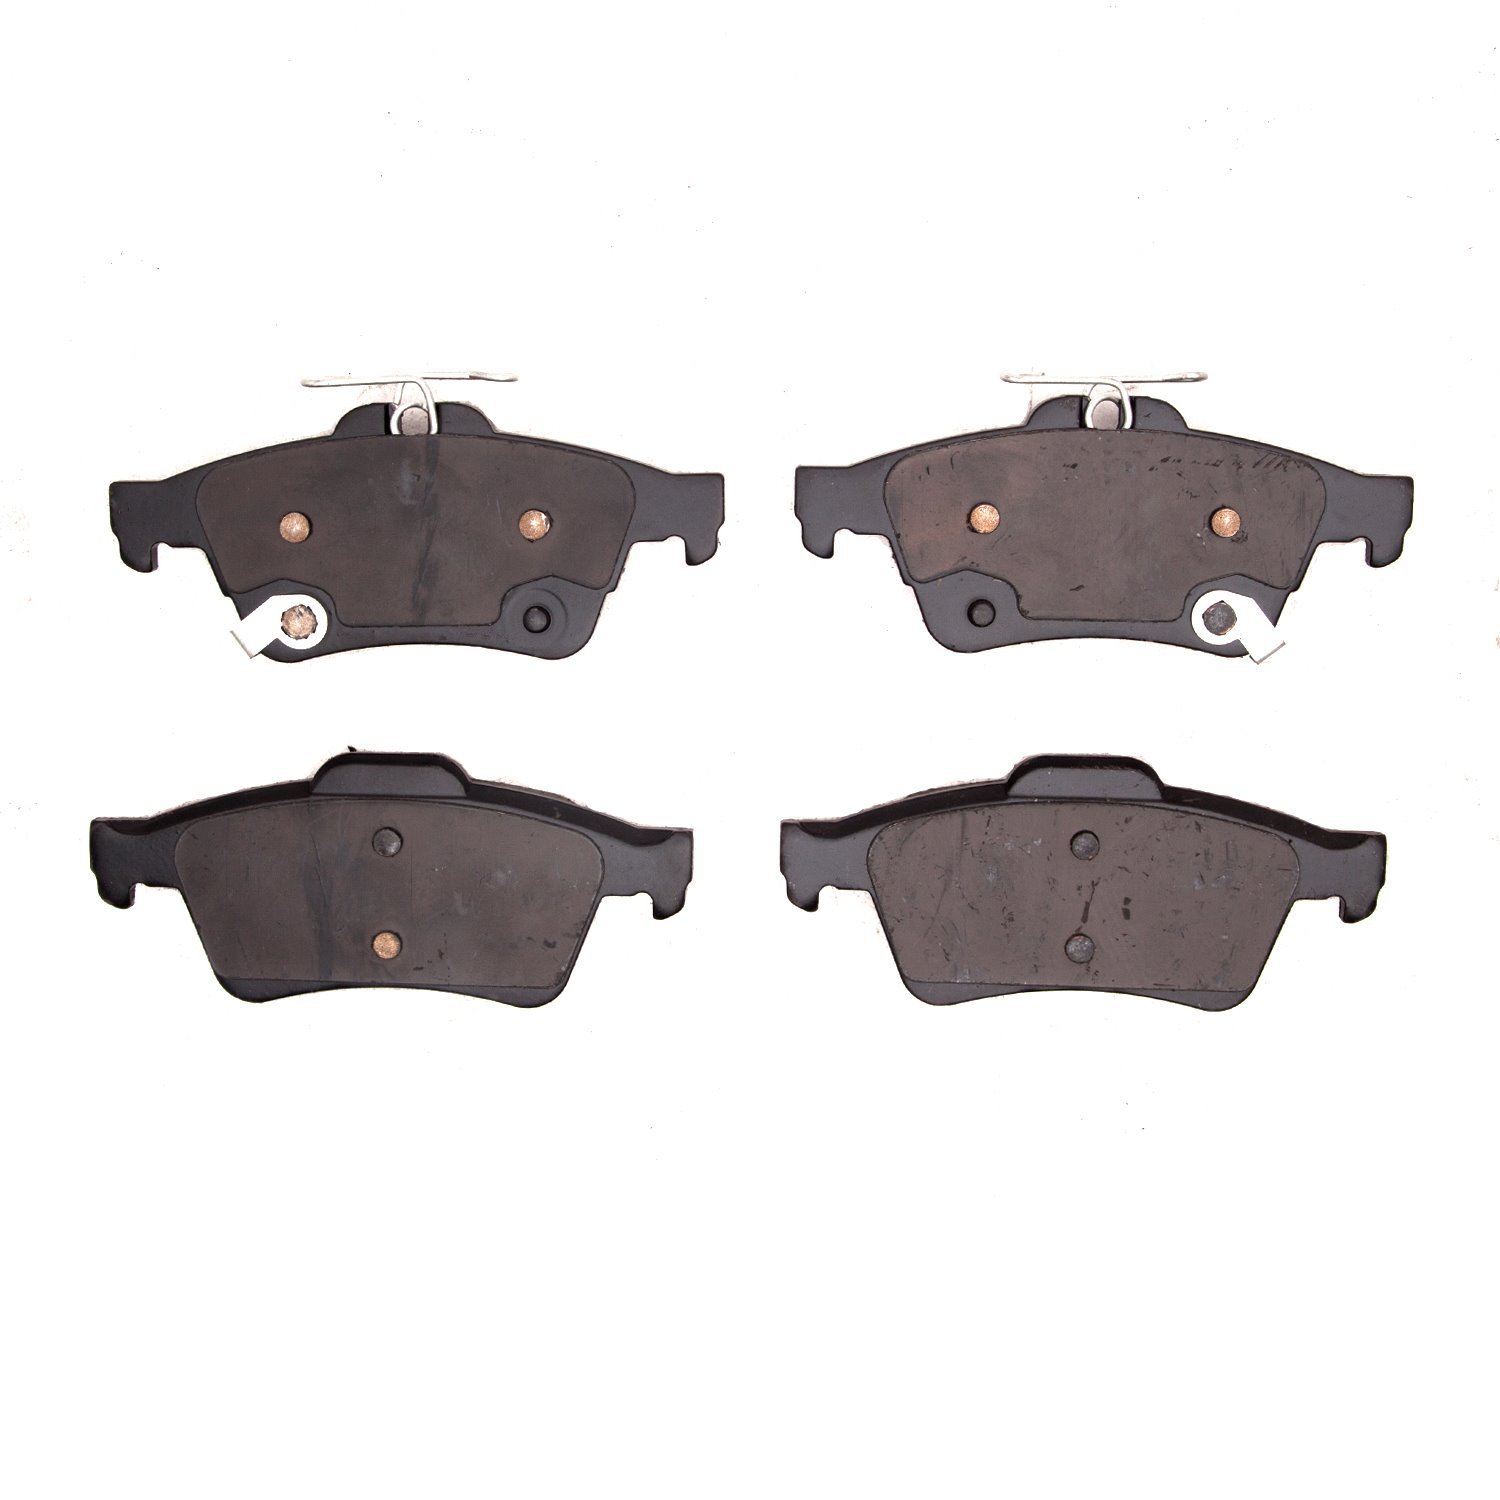 1310-1564-10 3000-Series Ceramic Brake Pads, Fits Select Ford/Lincoln/Mercury/Mazda, Position: Rear